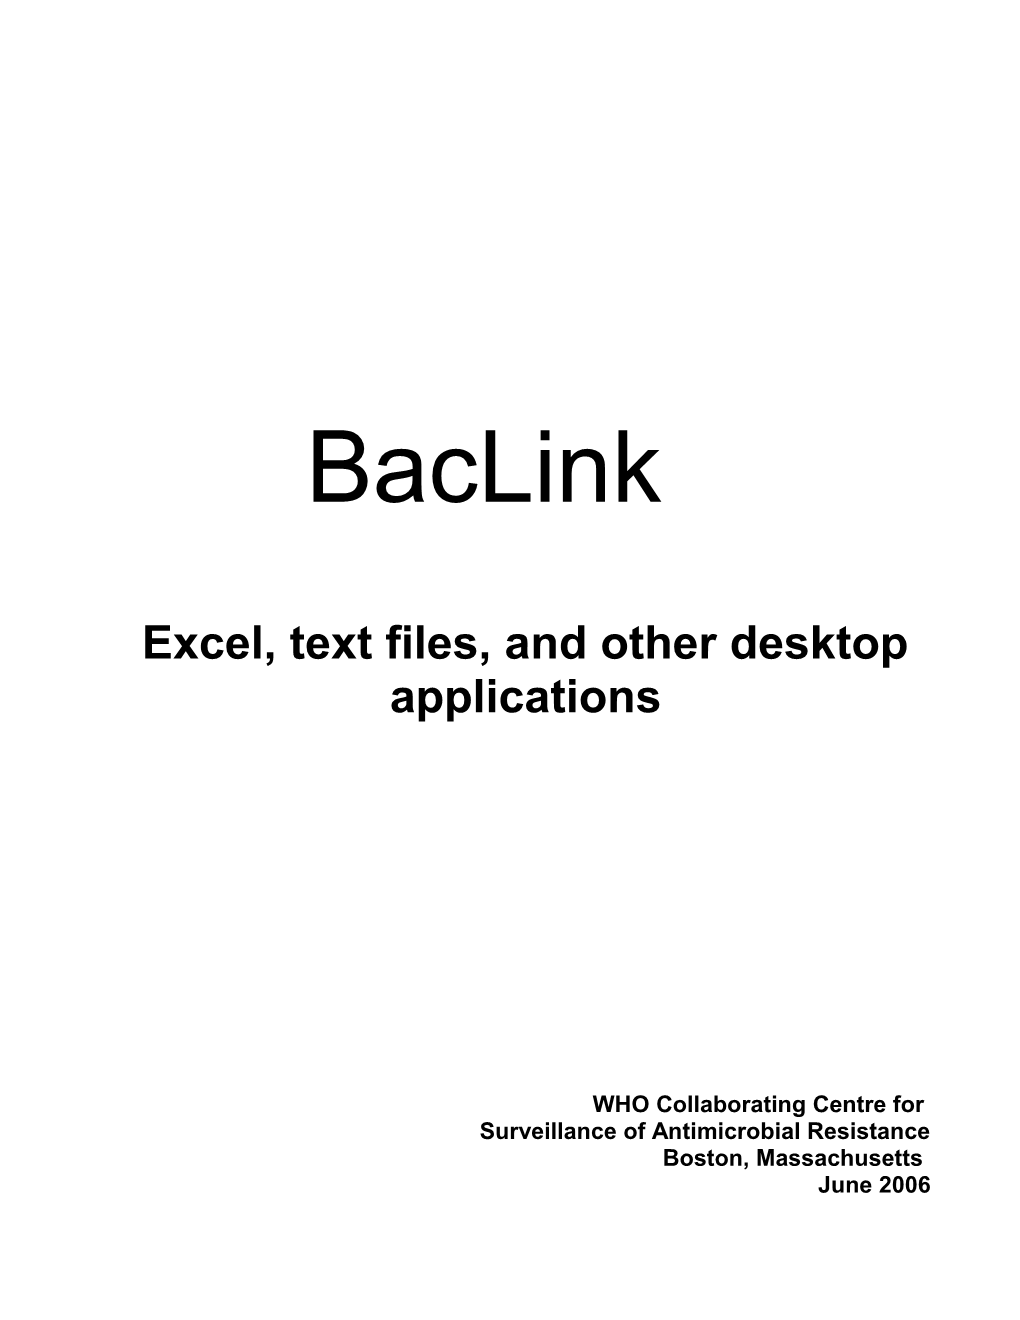 Meditech: Exporting Data to WHONET Using Baclink